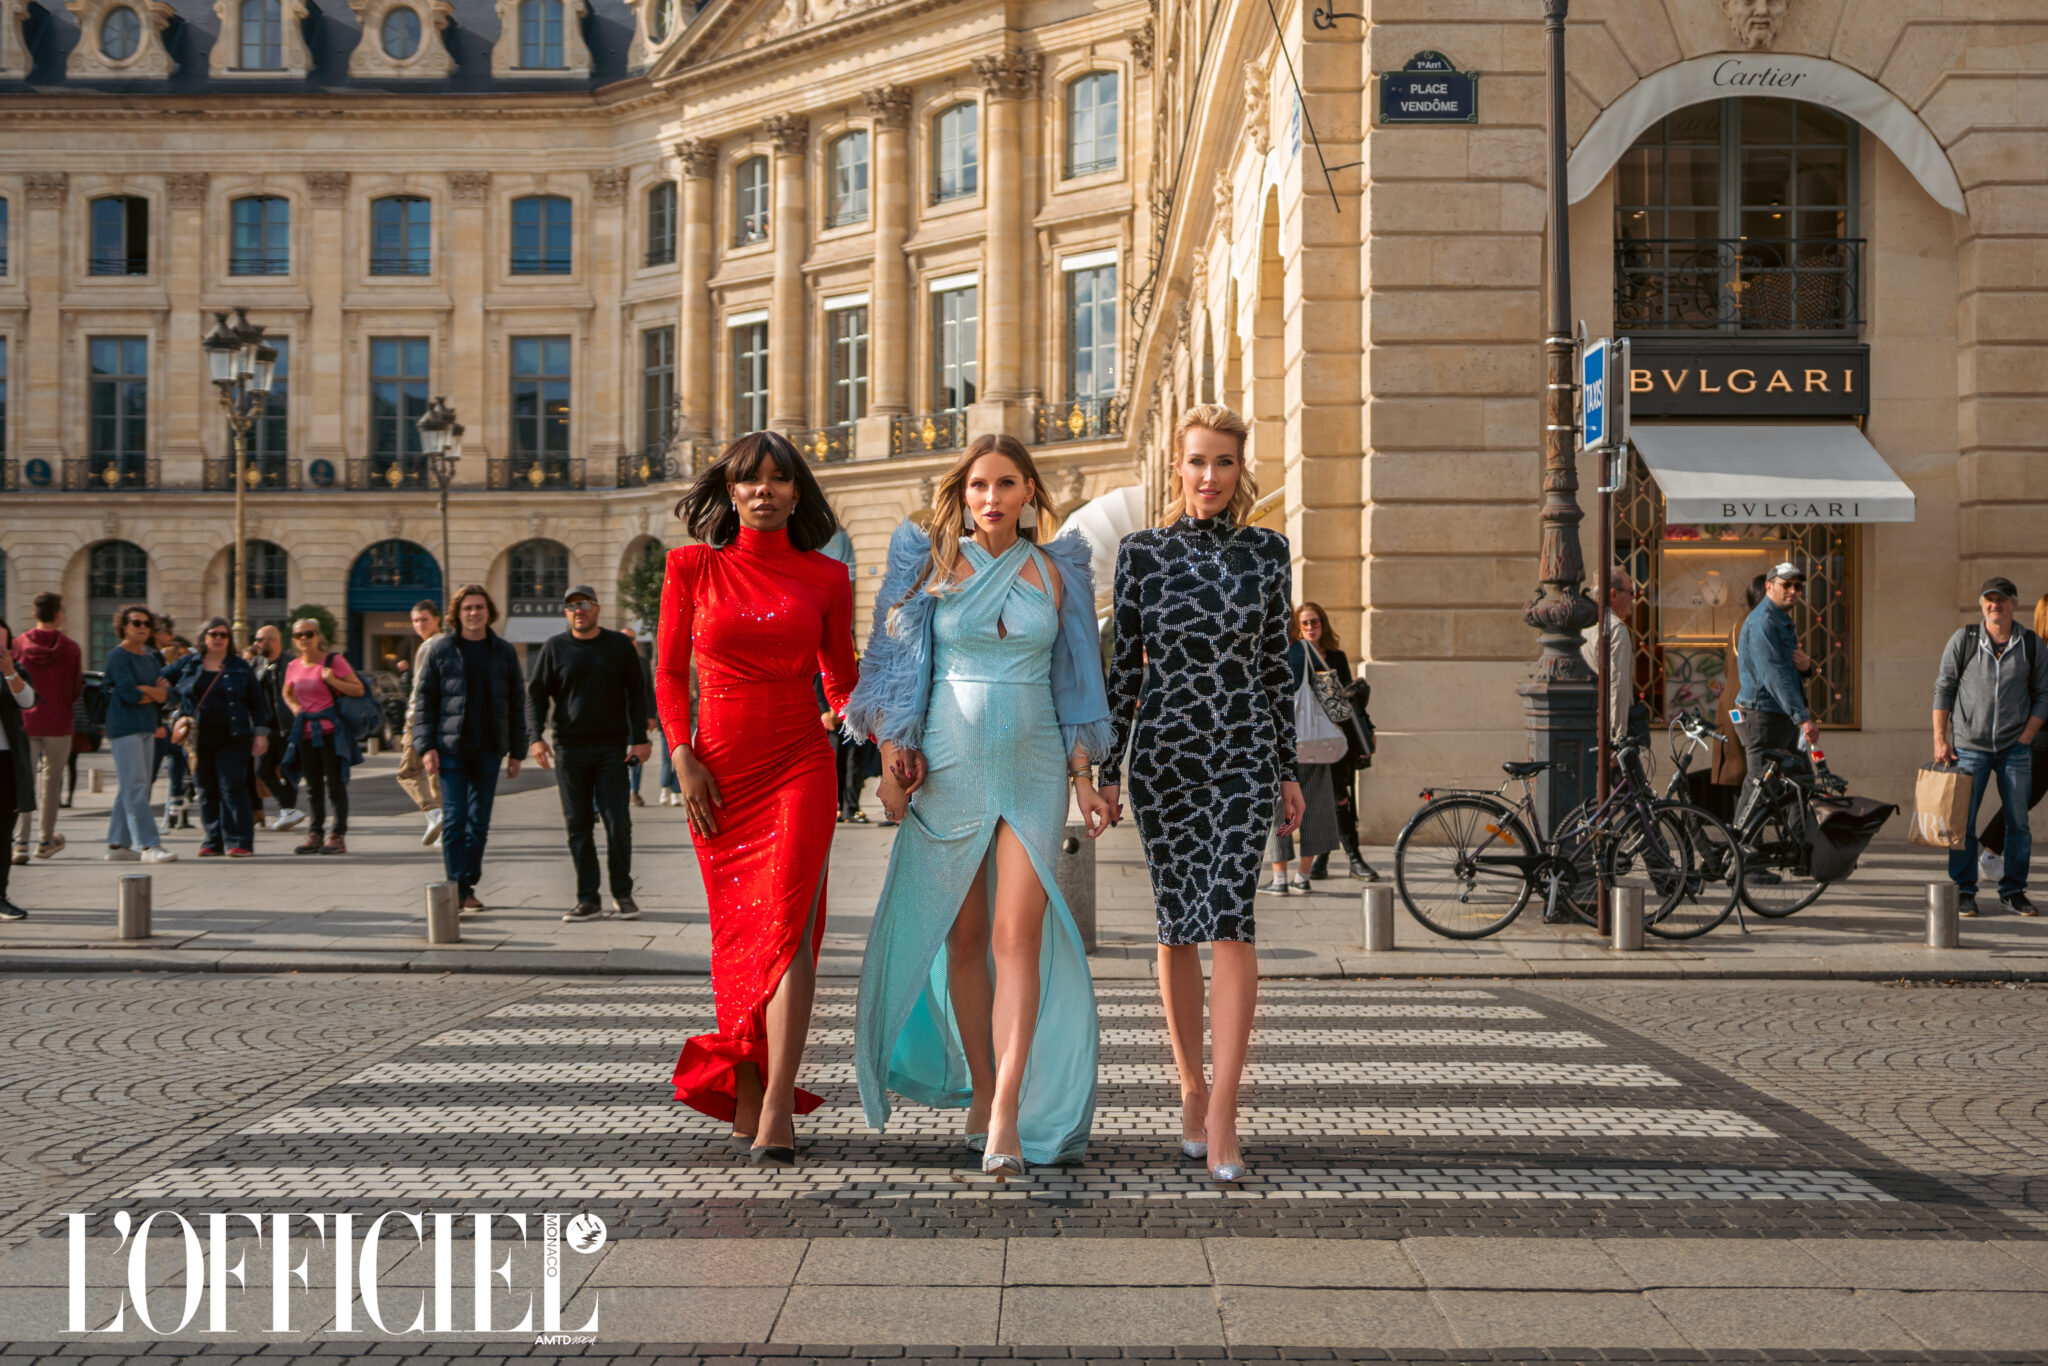 Feature at L'Officiel Monaco during Paris Fashion Week SS 23. Visual Fashion Story from the magical Paris. Featuring: Nicolas Besson, Gemy Maalouf, Charriol, Sol Angelann and more. 3